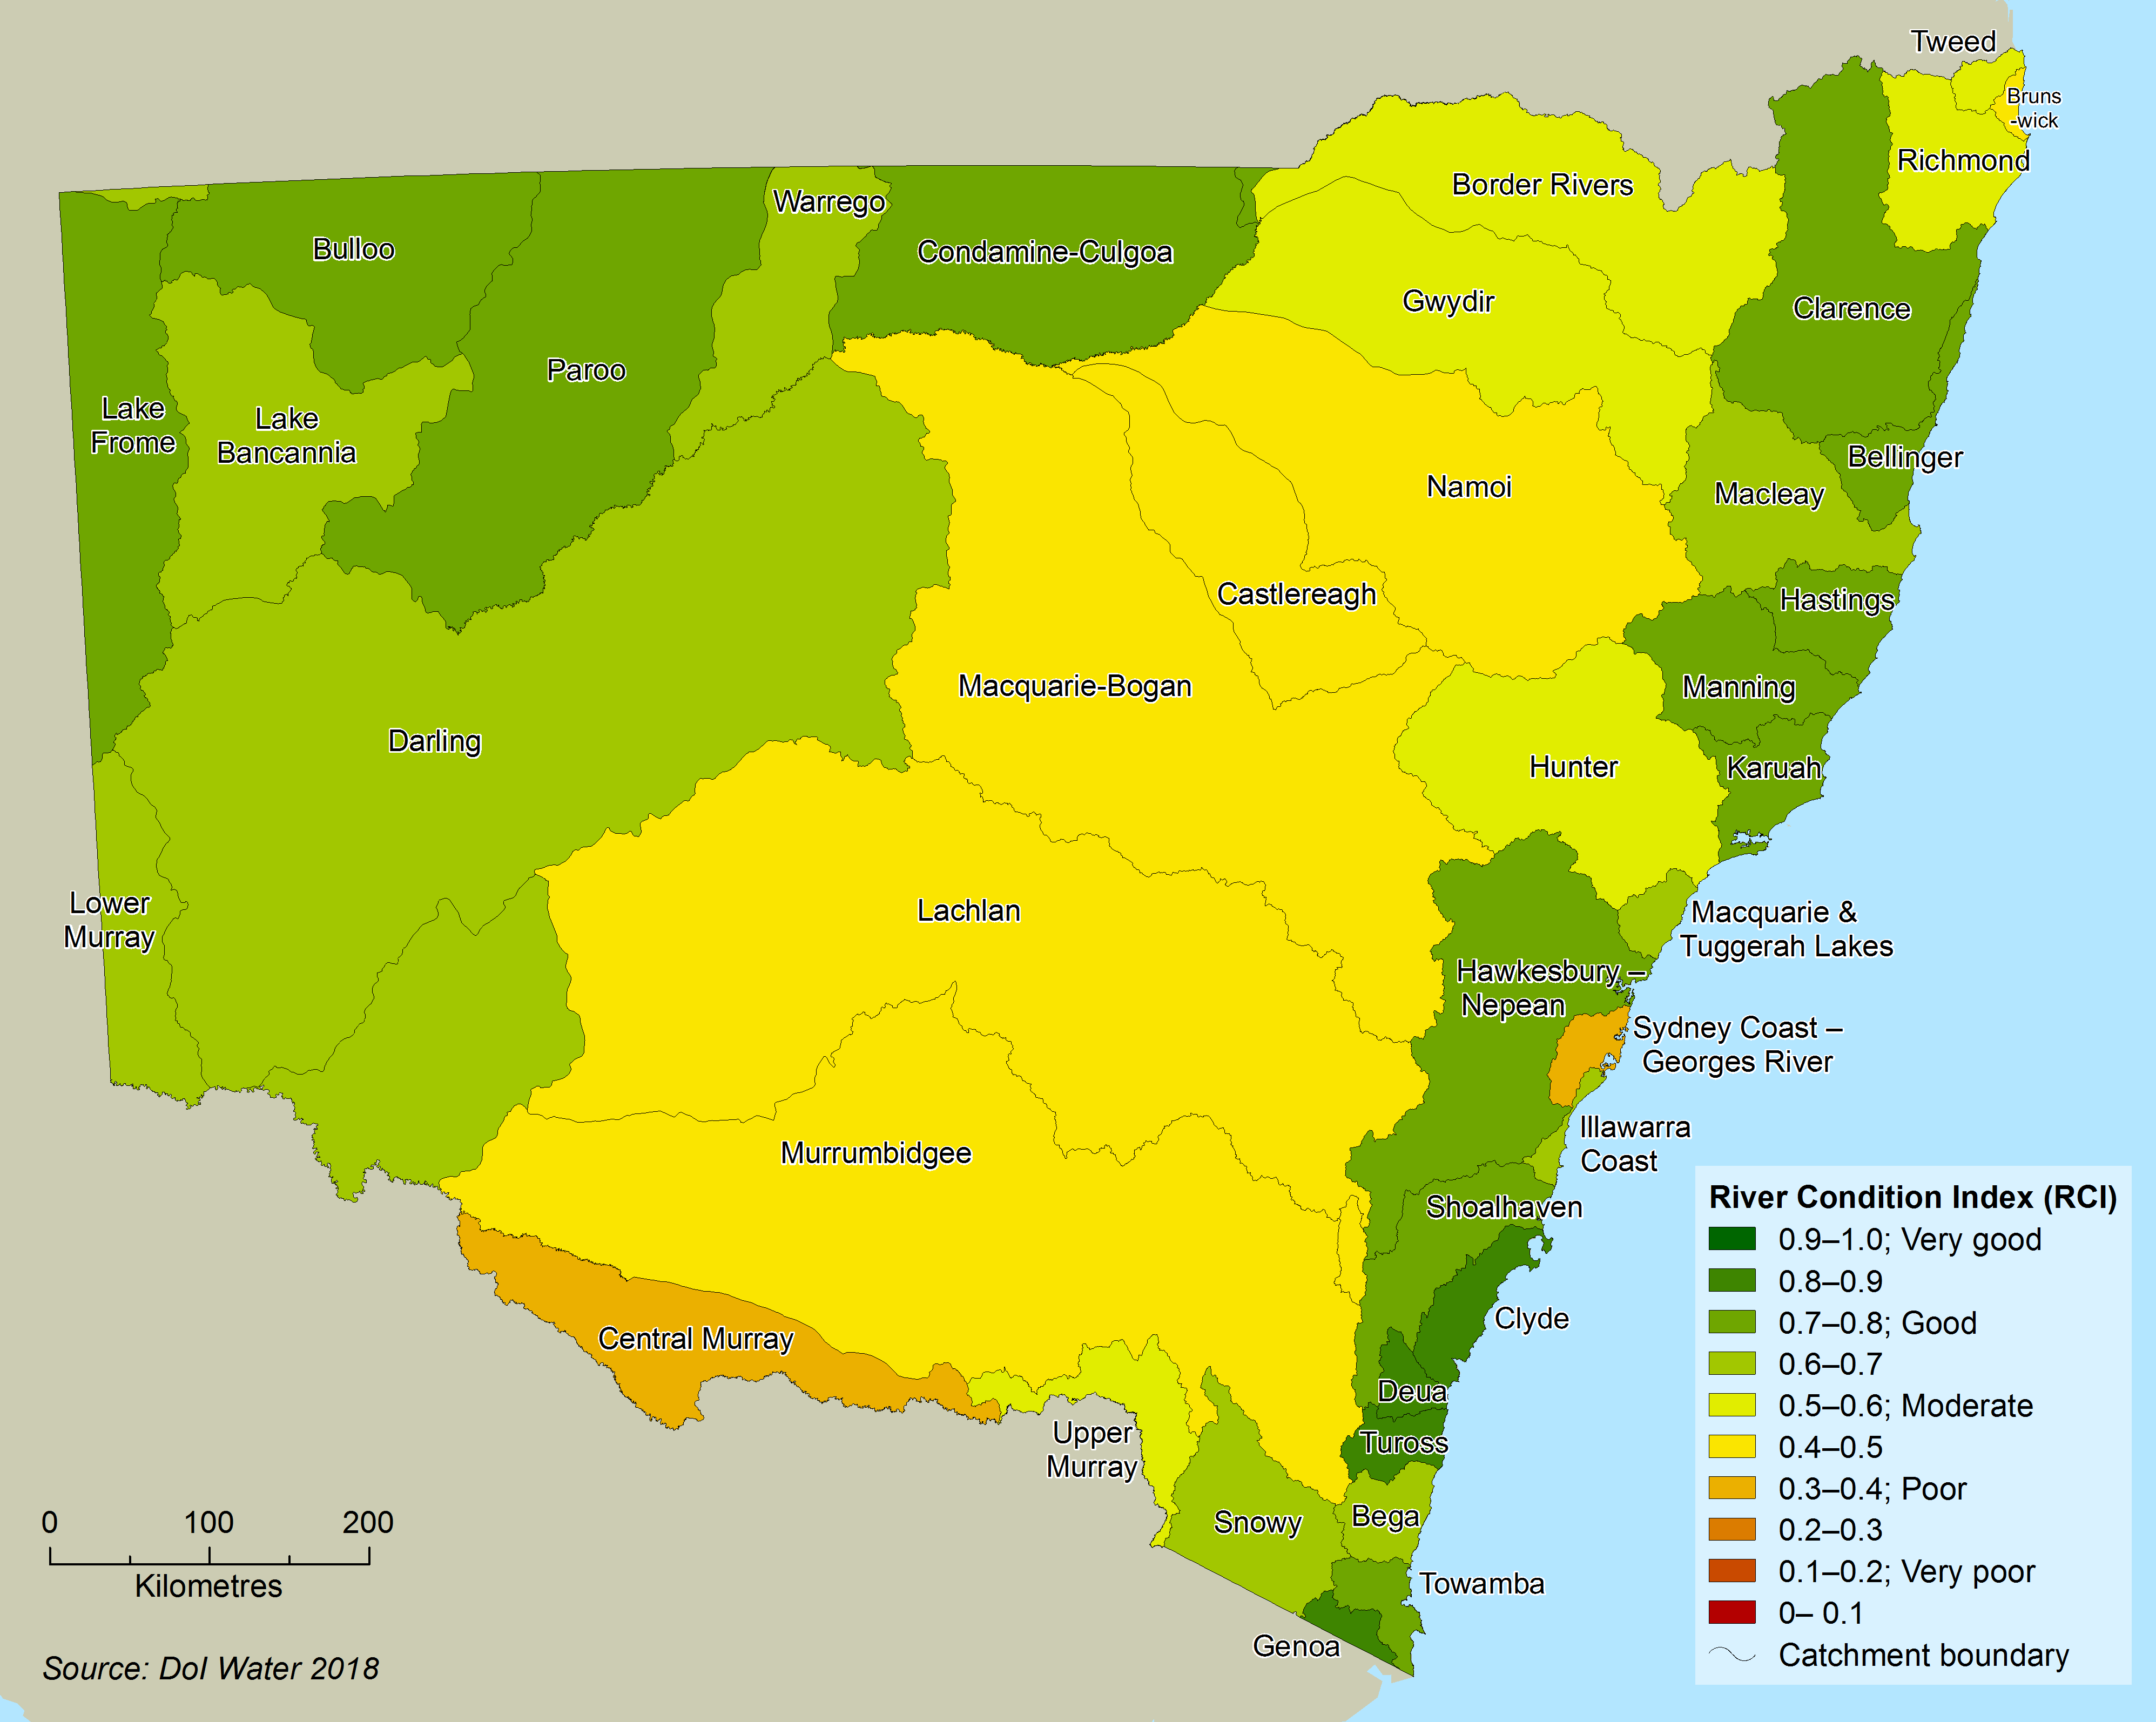 Map of River condition index by river catchment showing condition in increments of 0.1 from 0 to 1. Most river catchments in the central part of NSW are moderate, coastal and north-west catchments outside the Murray_Darling basin  are in better condition.